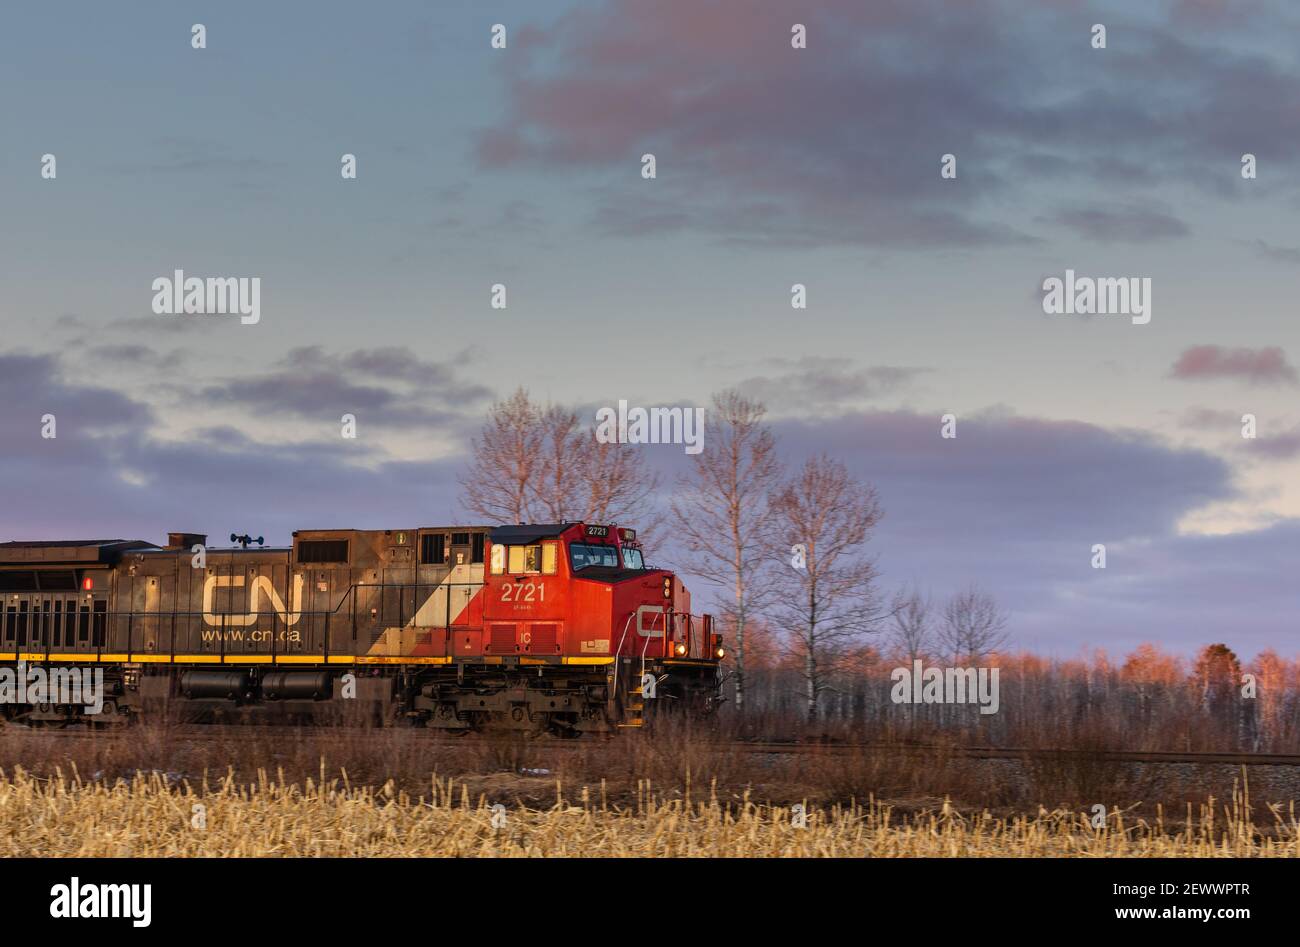 CN freight train passing through a farming community in Exeland, Wisconsin. Stock Photo